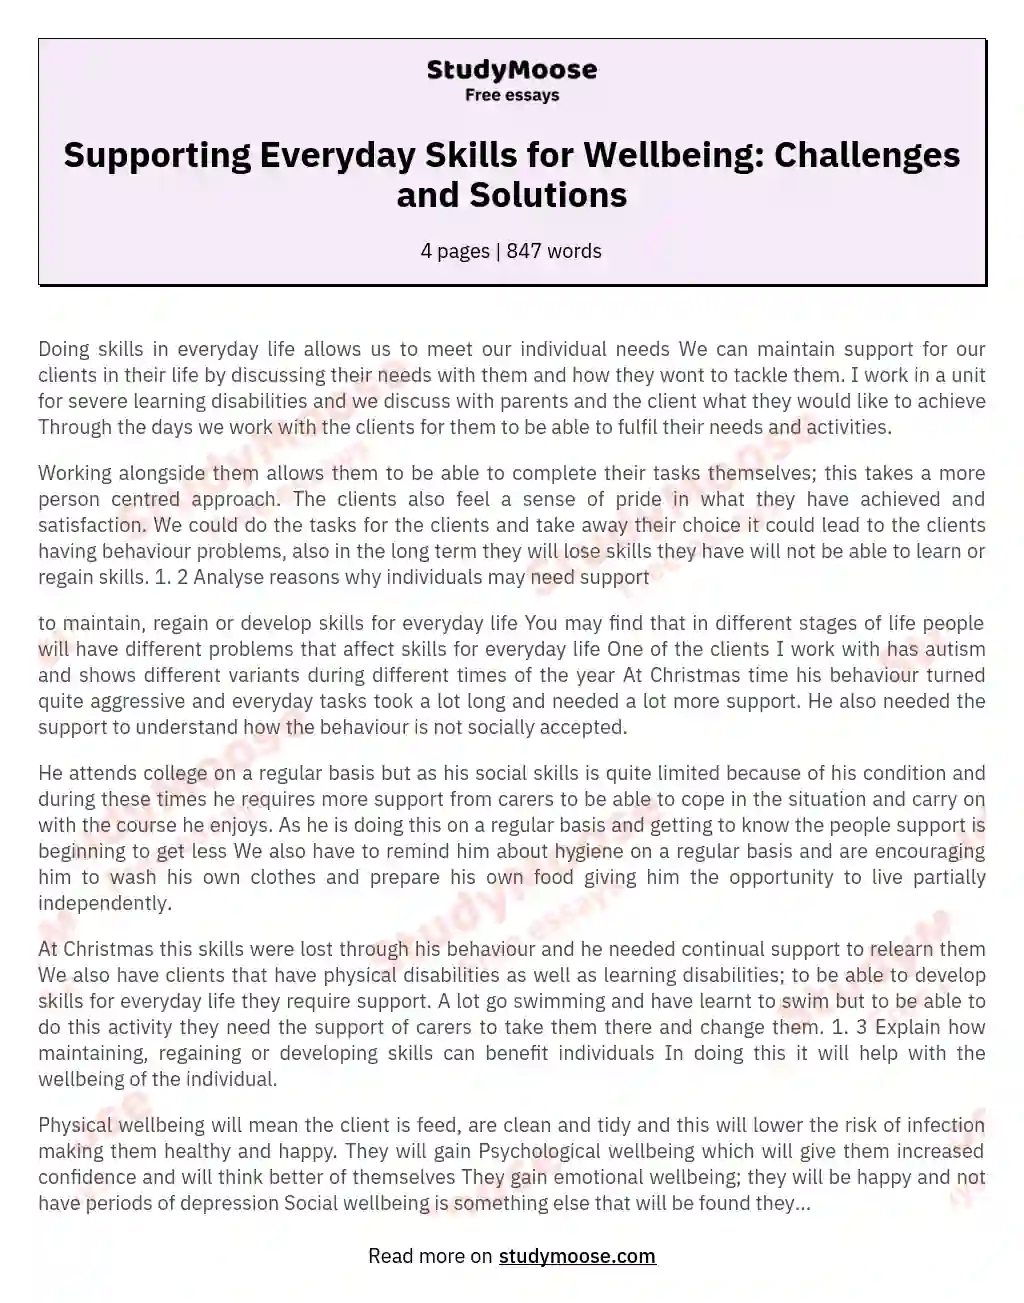 Supporting Everyday Skills for Wellbeing: Challenges and Solutions essay